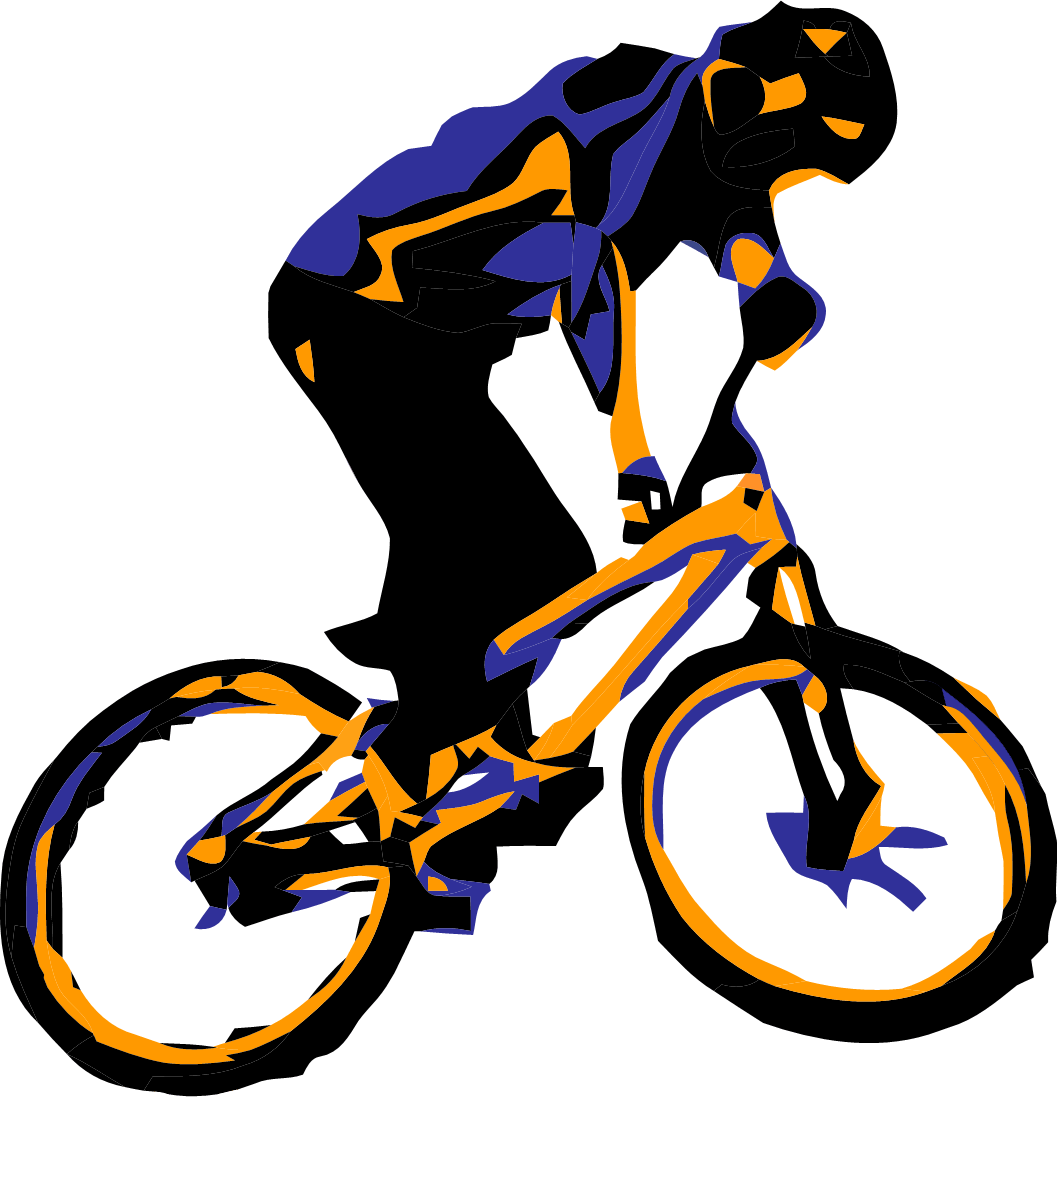 Whip clipart dirtbike. Charming inspiration bike bicycle